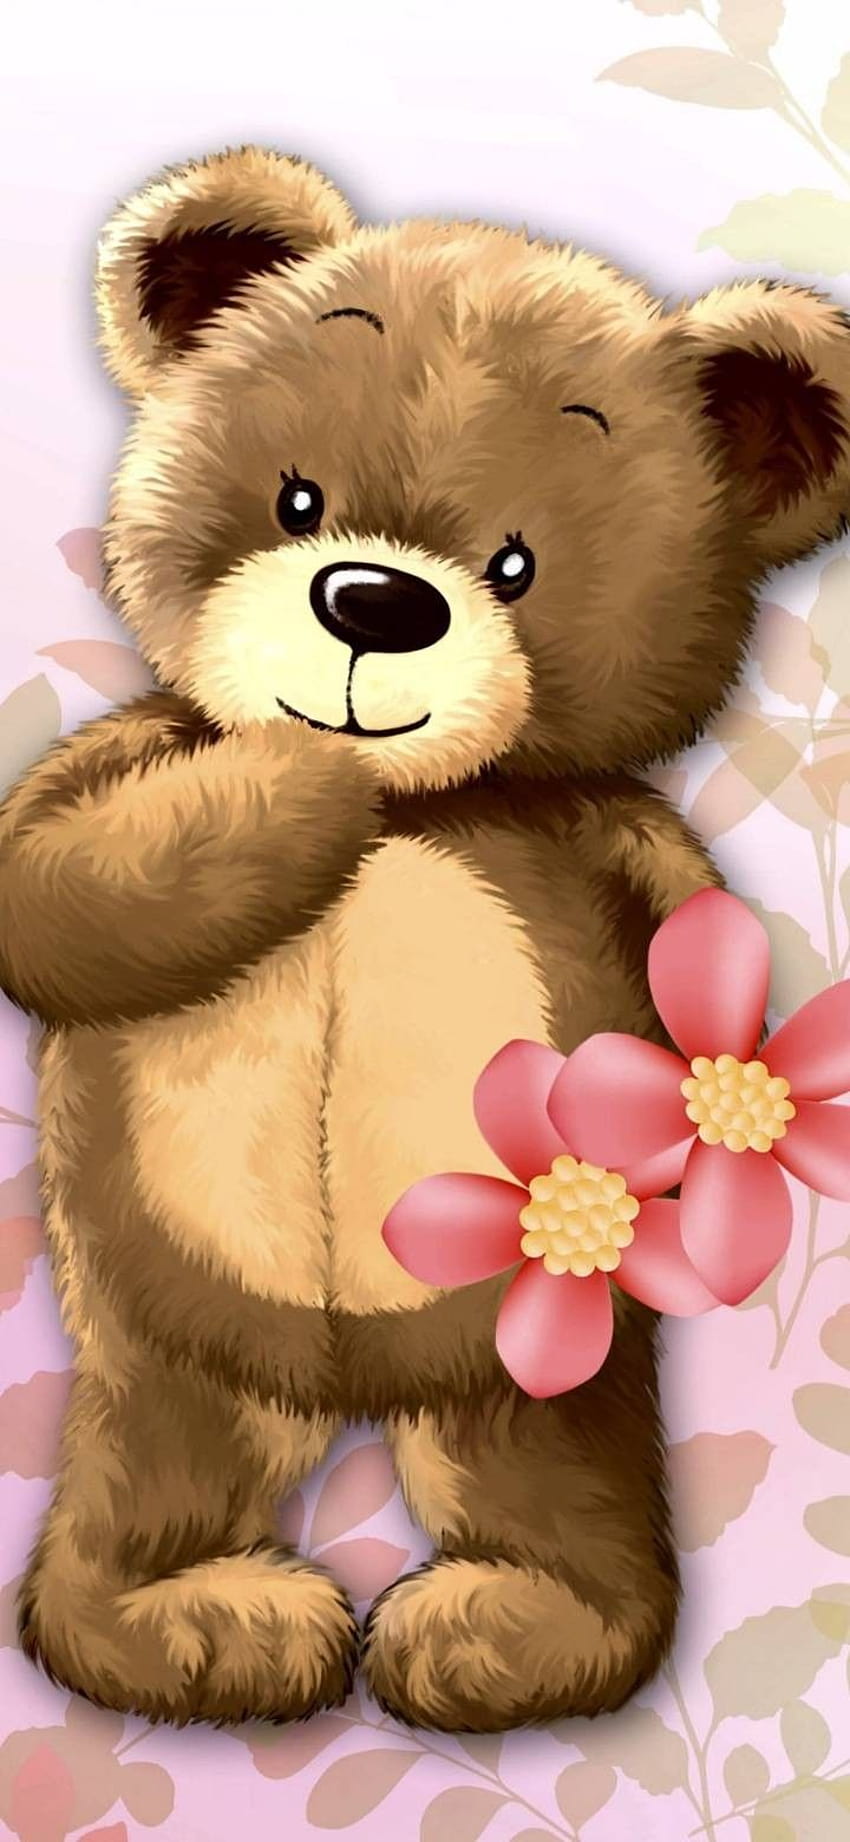 Cute Teddy Bear WallpapersAmazoncomAppstore for Android